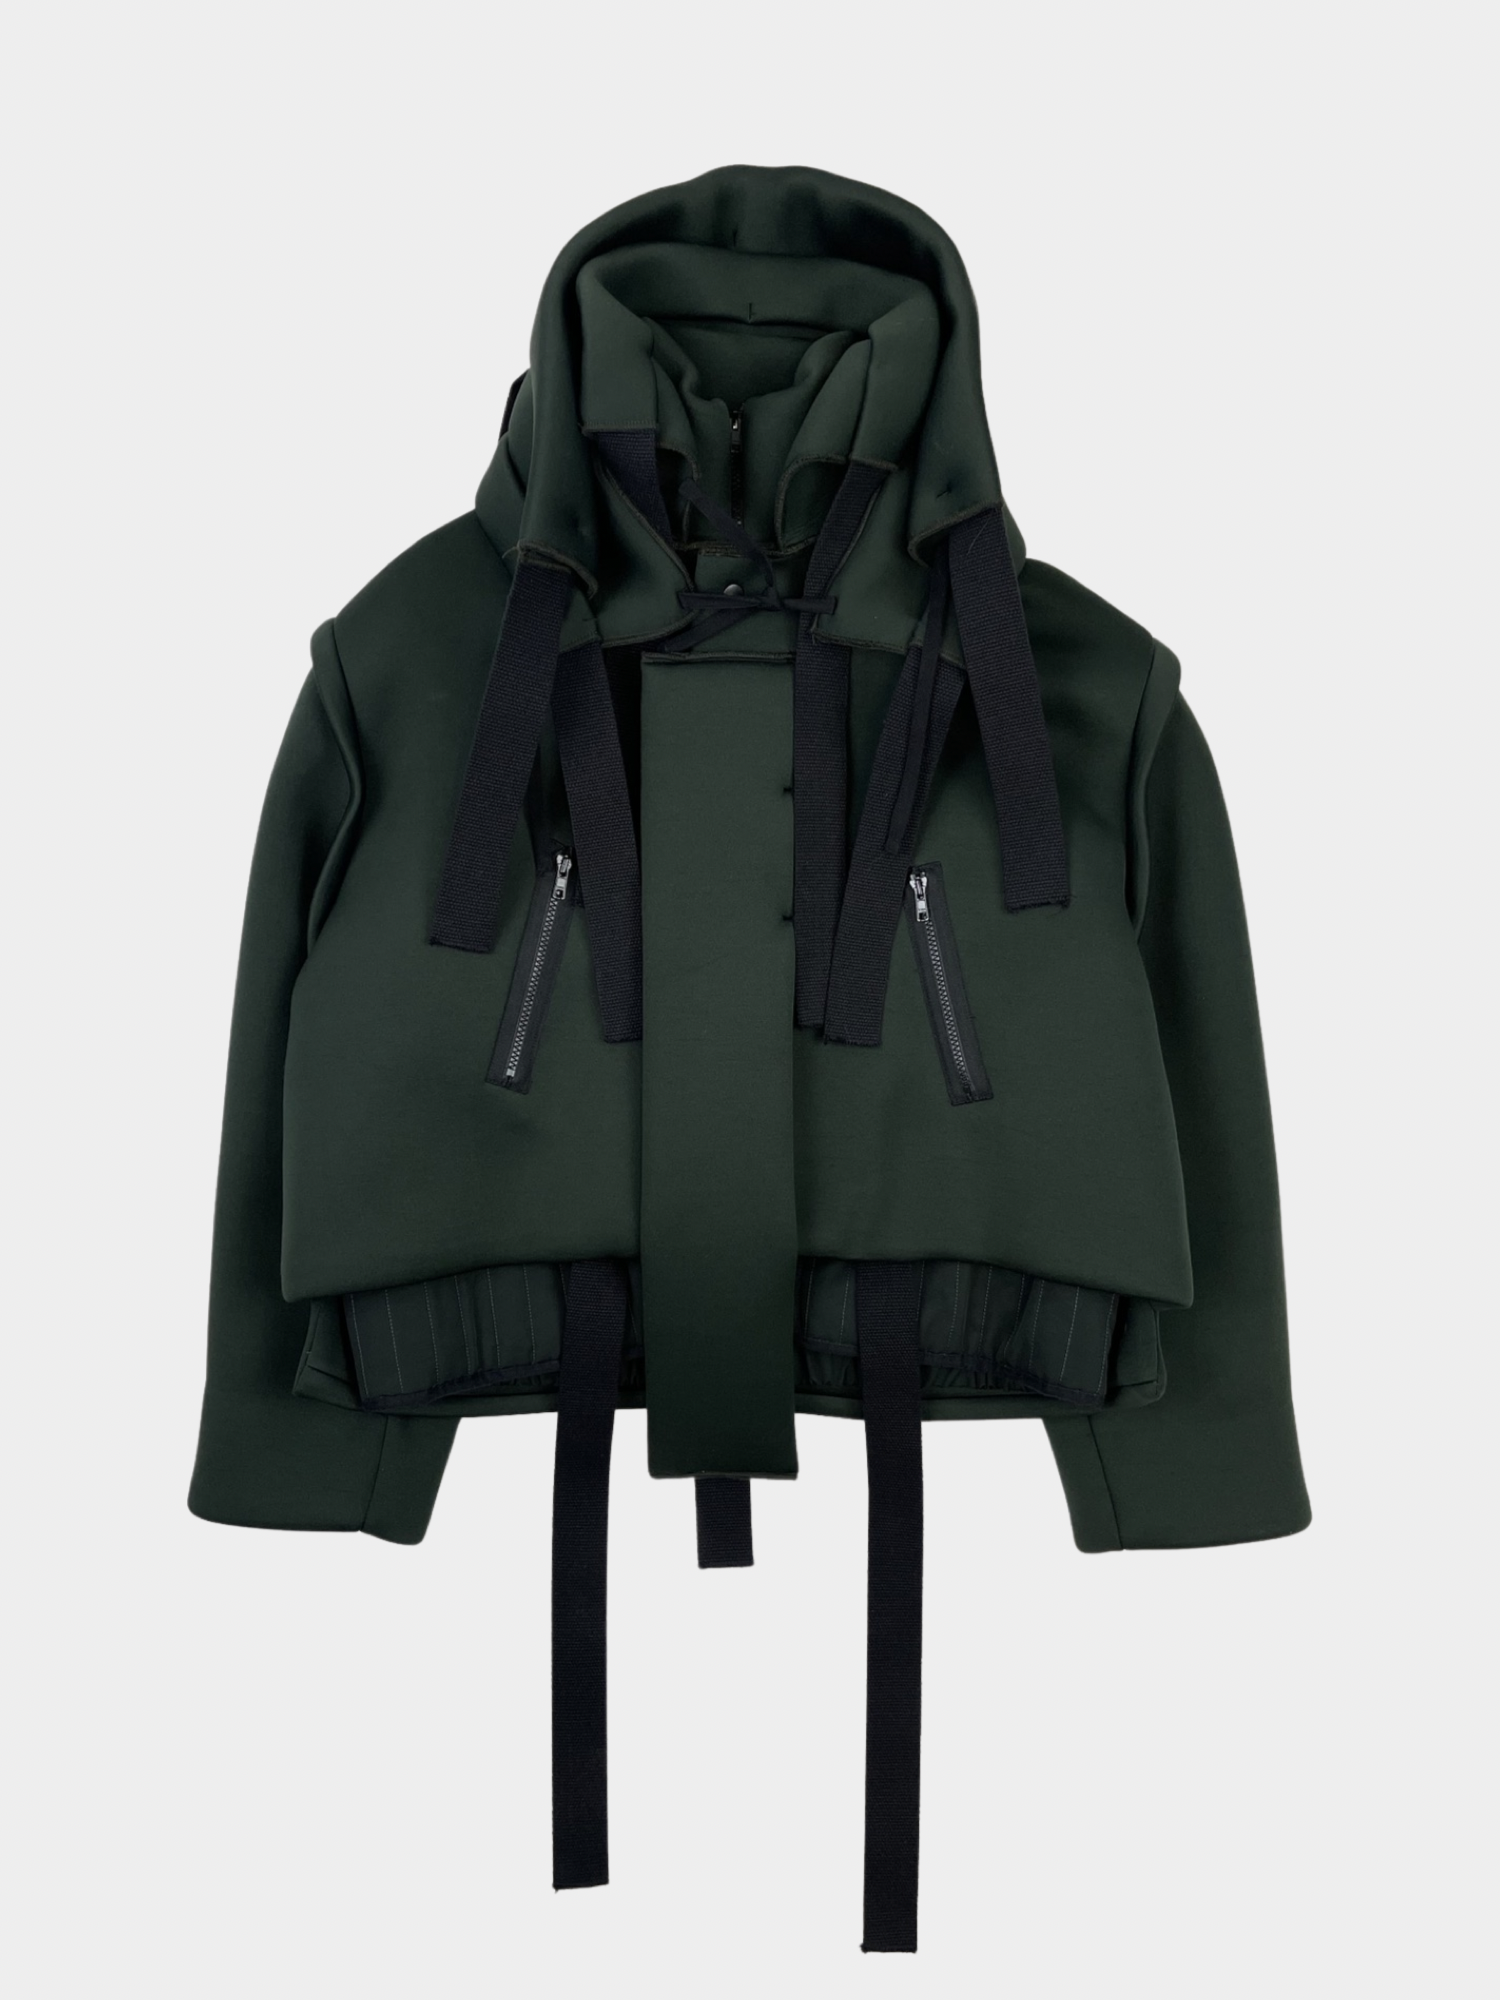 CRAIG GREEN A/W2015 NEOPRENE PARACHUTE JACKET - ARCHIVED